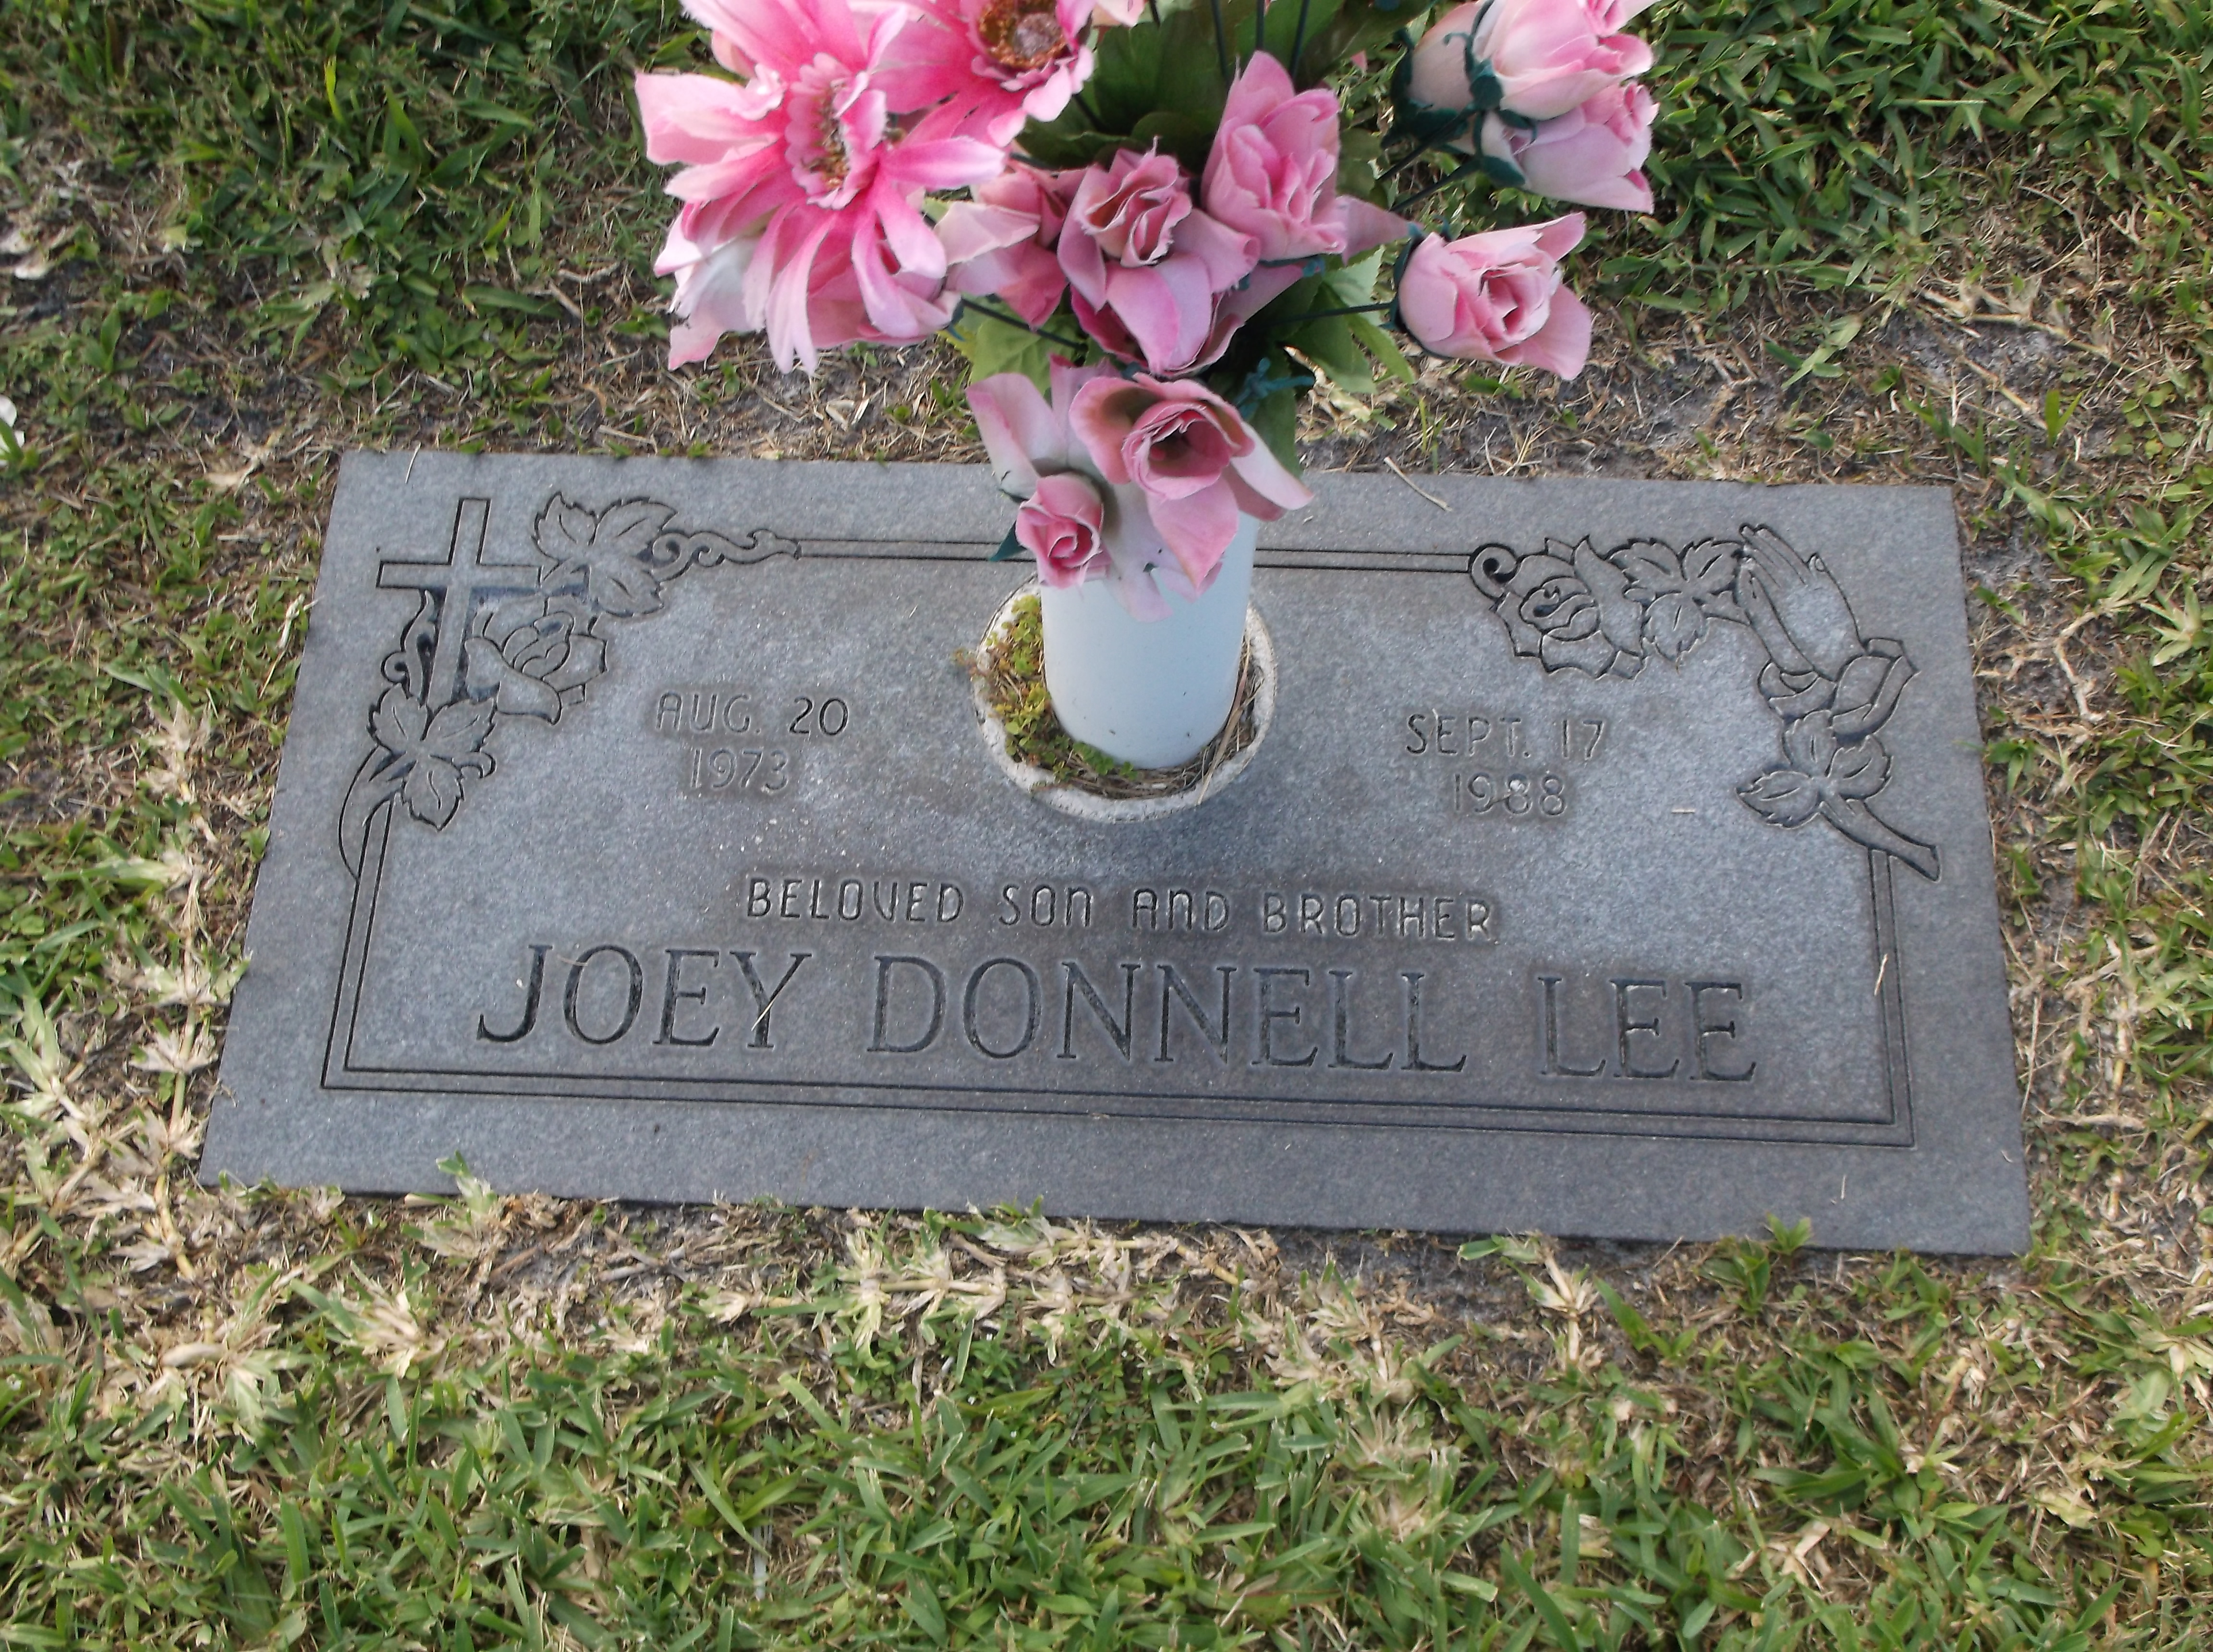 Joey Donnell Lee